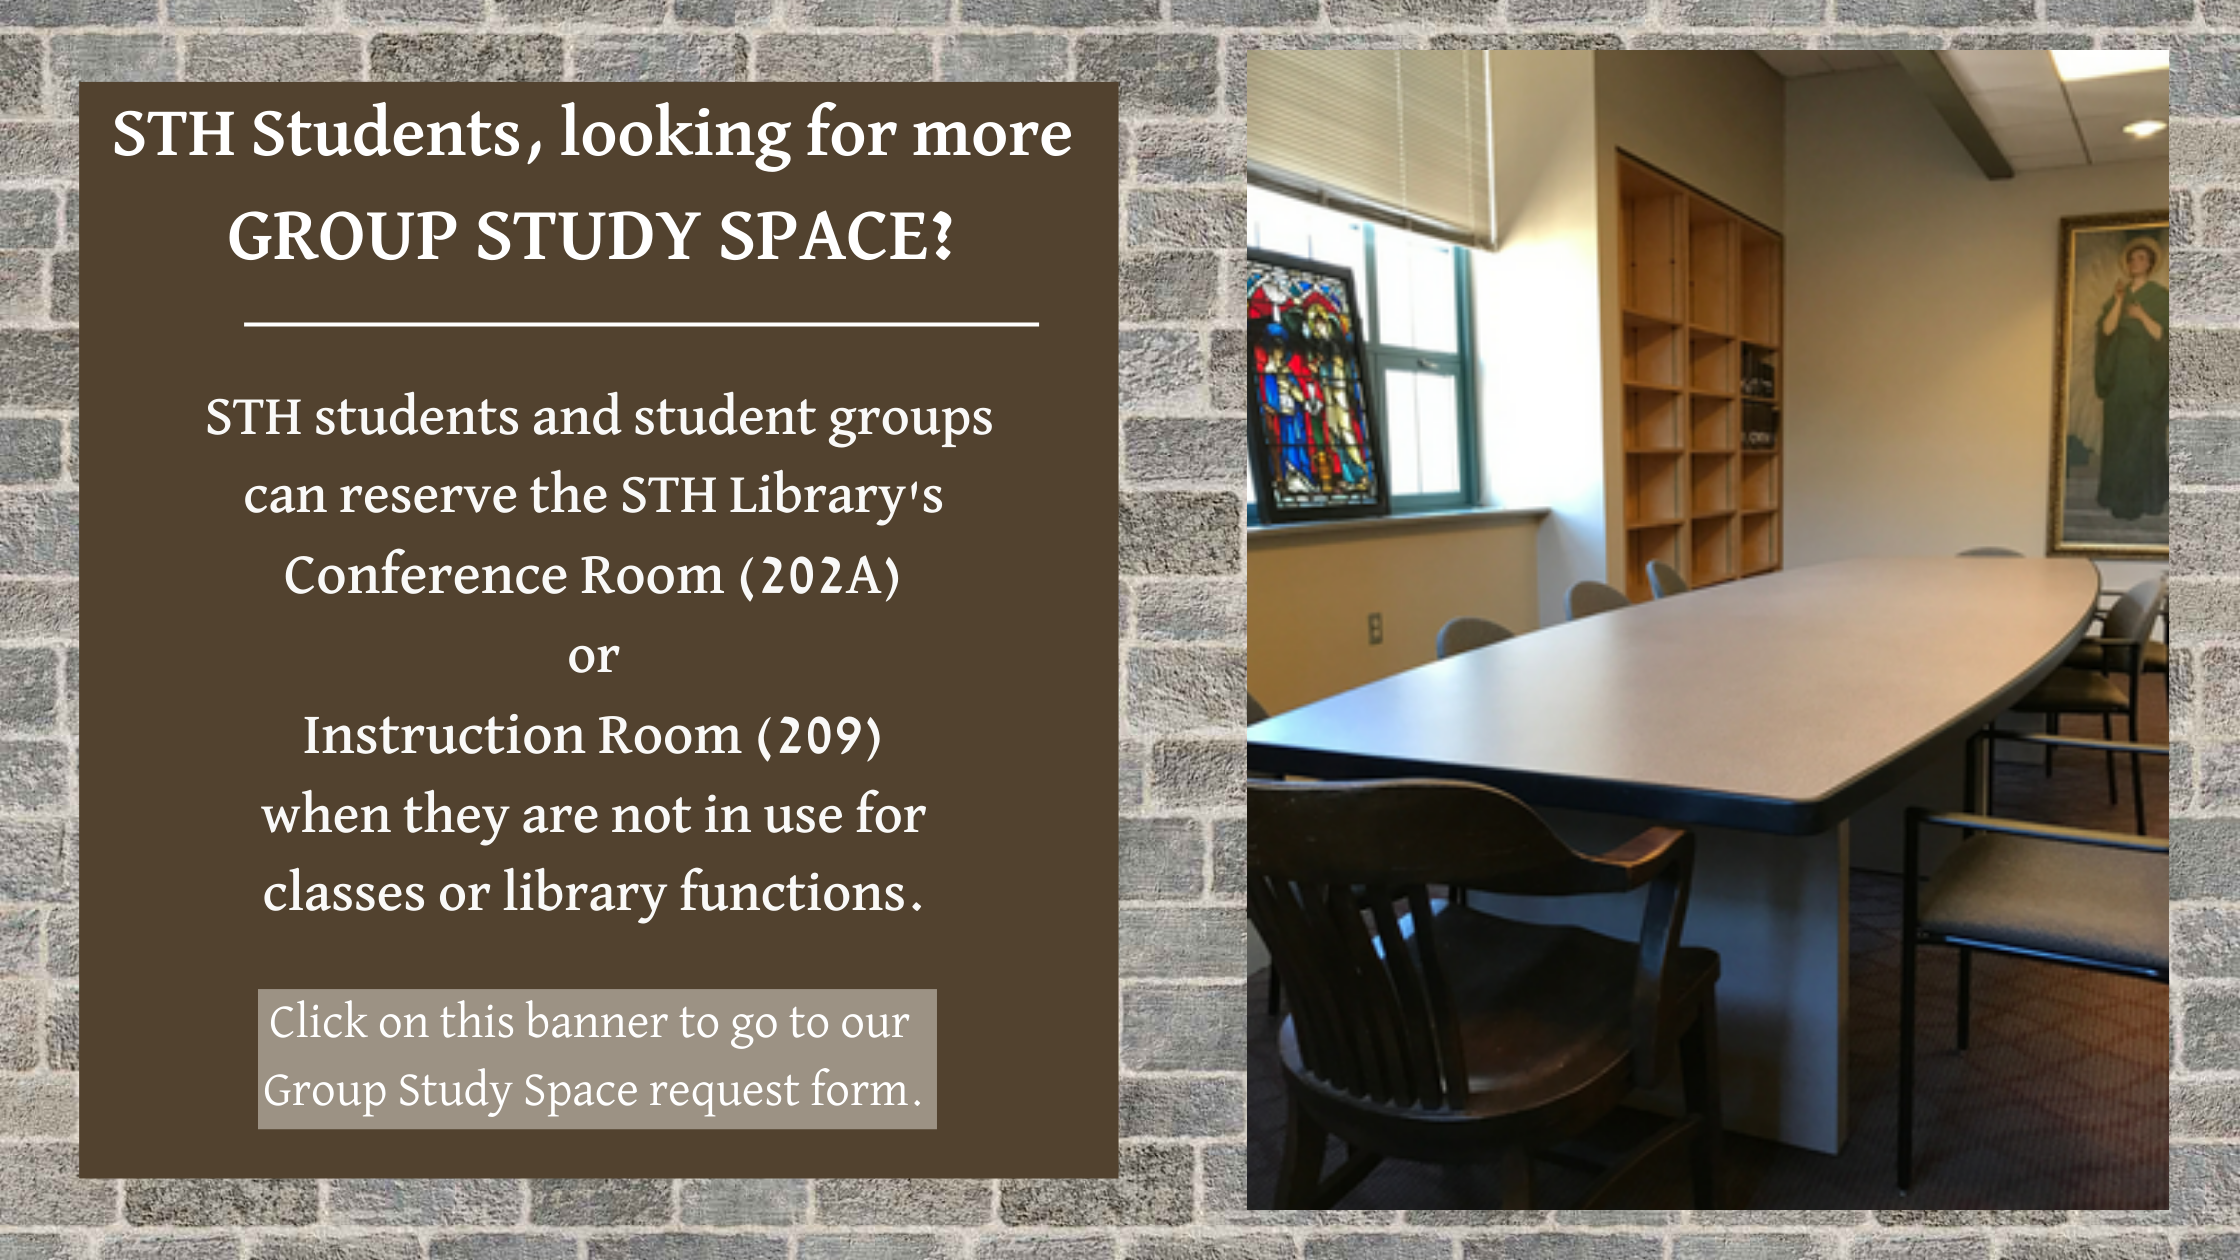 STH Students can click on this banner to request group study spaces in 202A (conference room) or 209 (instruction room).